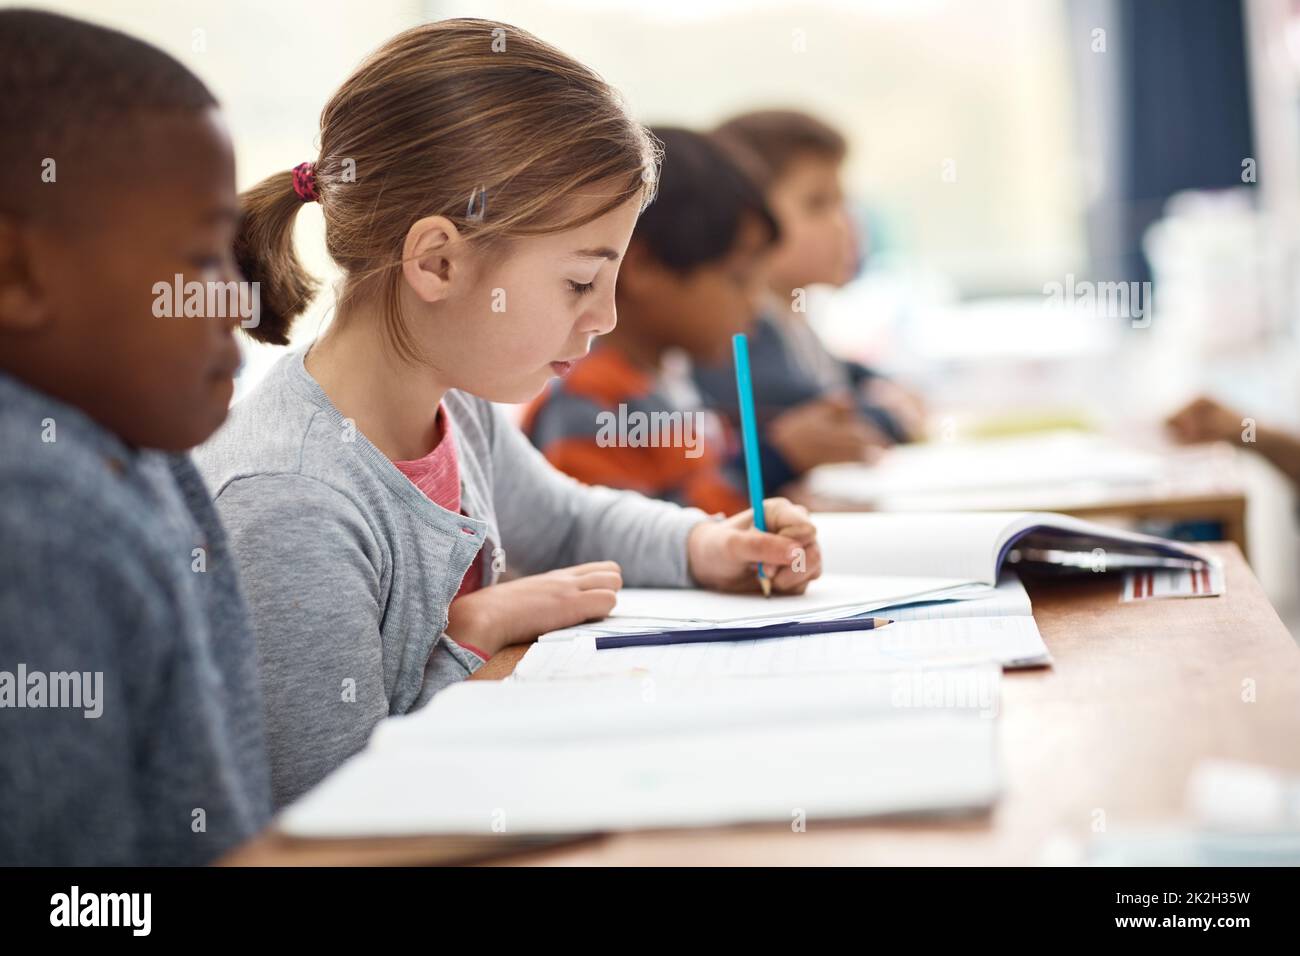 Shes a focused learner. Shot of an elementary school girl working alongside her peers in class. Stock Photo